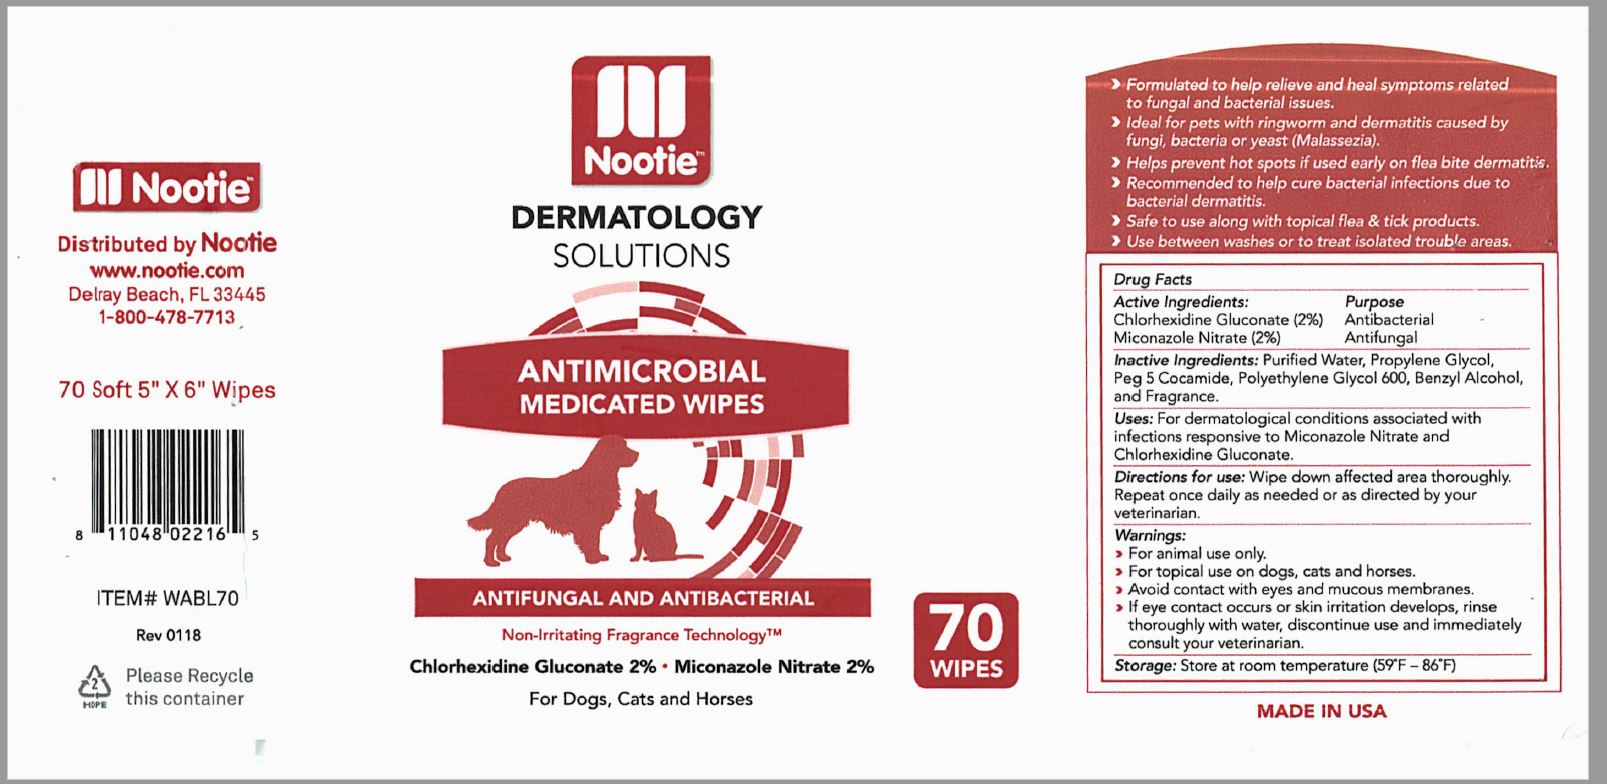 01b LBL_Nootie_Antimicrobial Wipes 70 ct